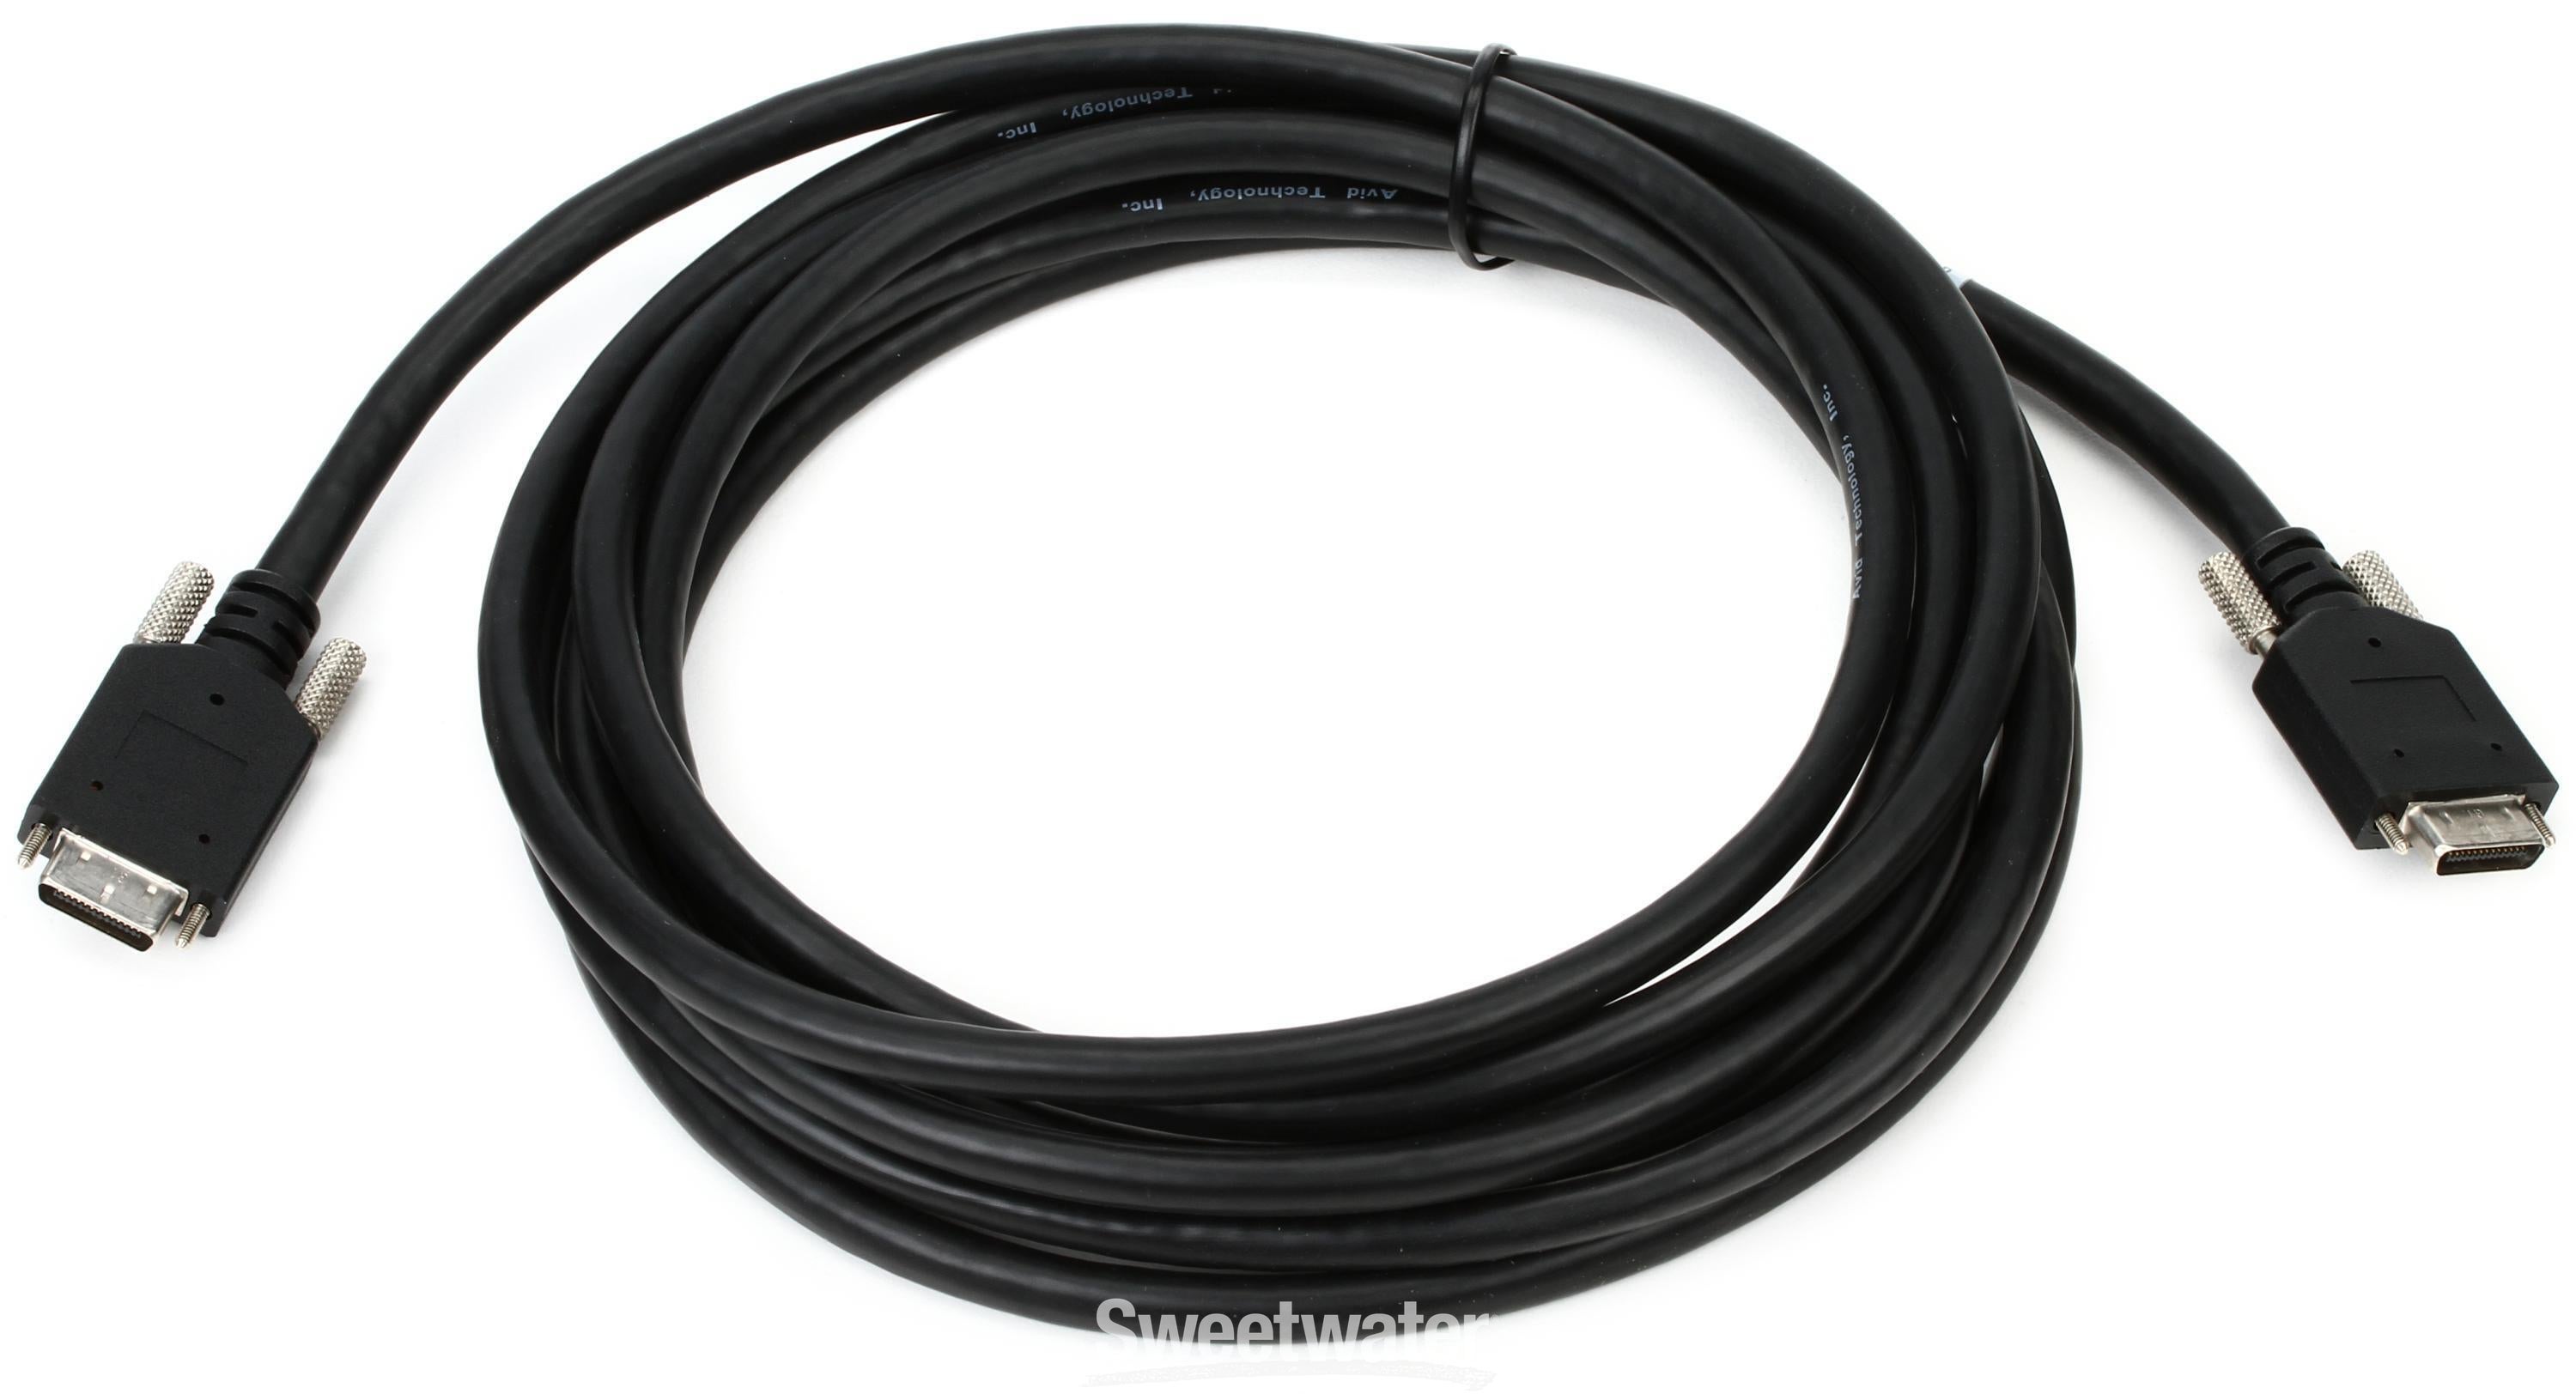 Avid DigiLink Mini Cable - 12 foot | Sweetwater